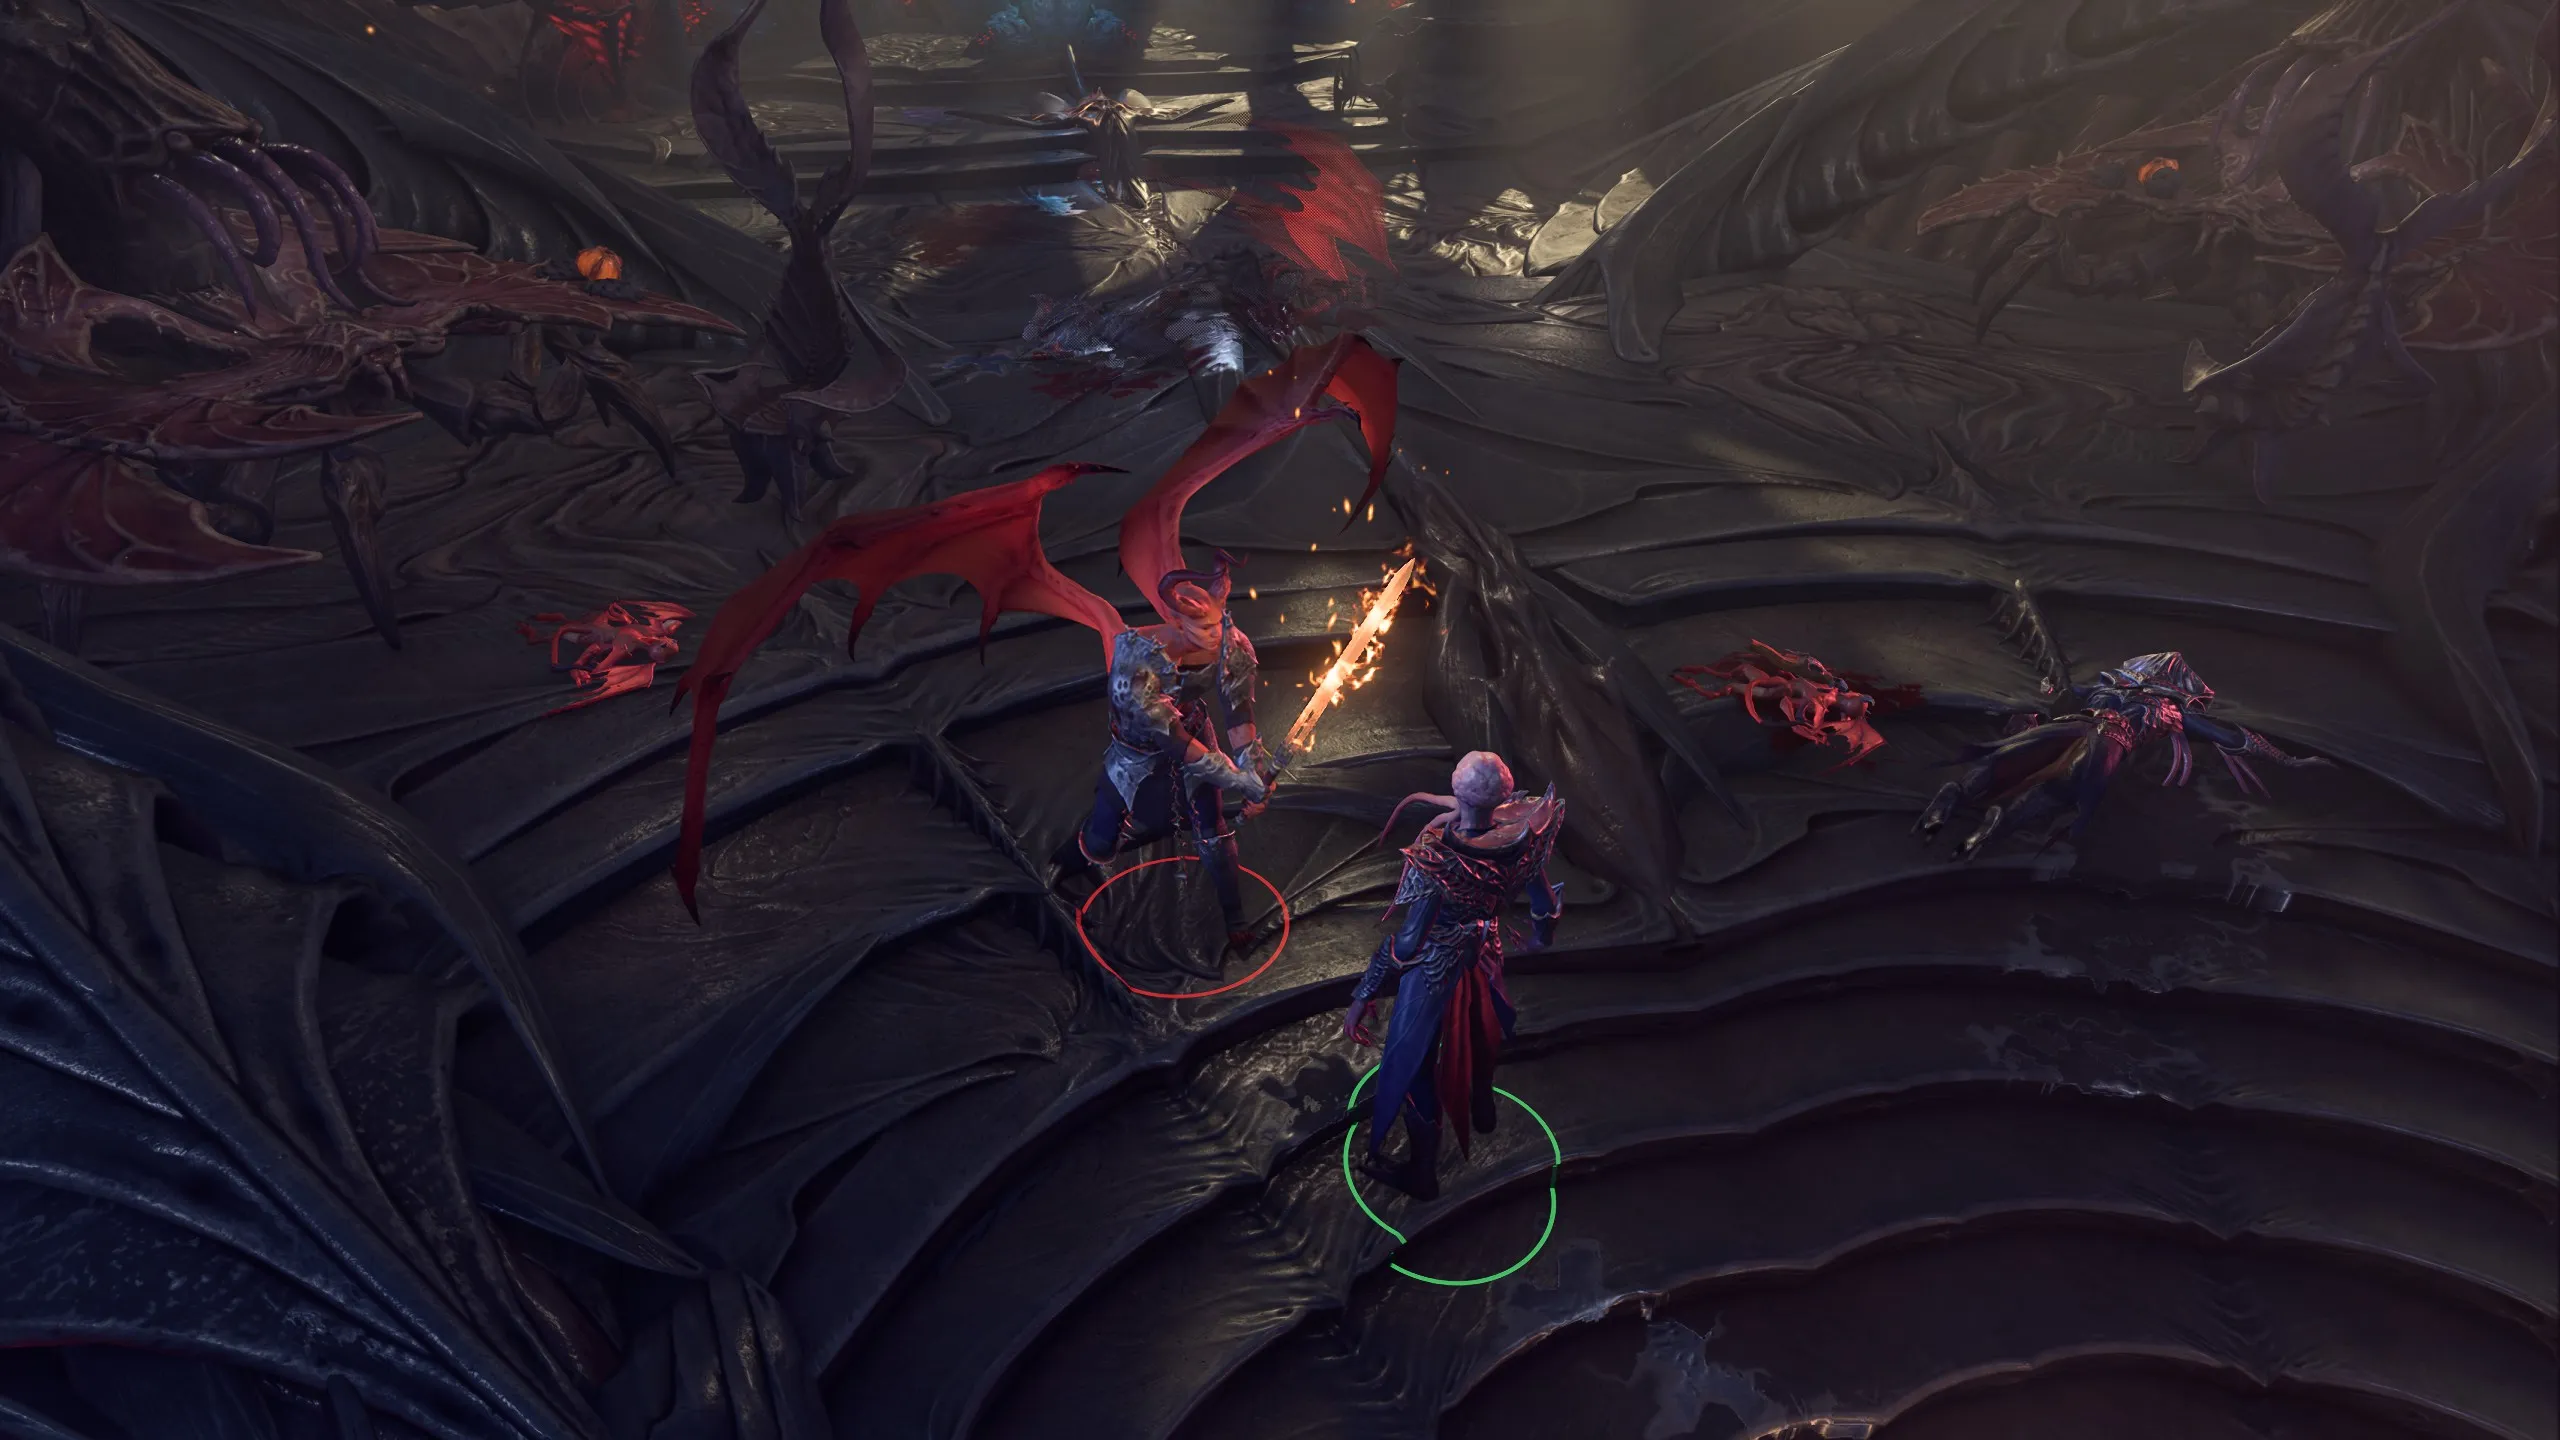 Commander Zhalk engaged in combat with the Mind Flayer during the Baldur's Gate 3 prologue.